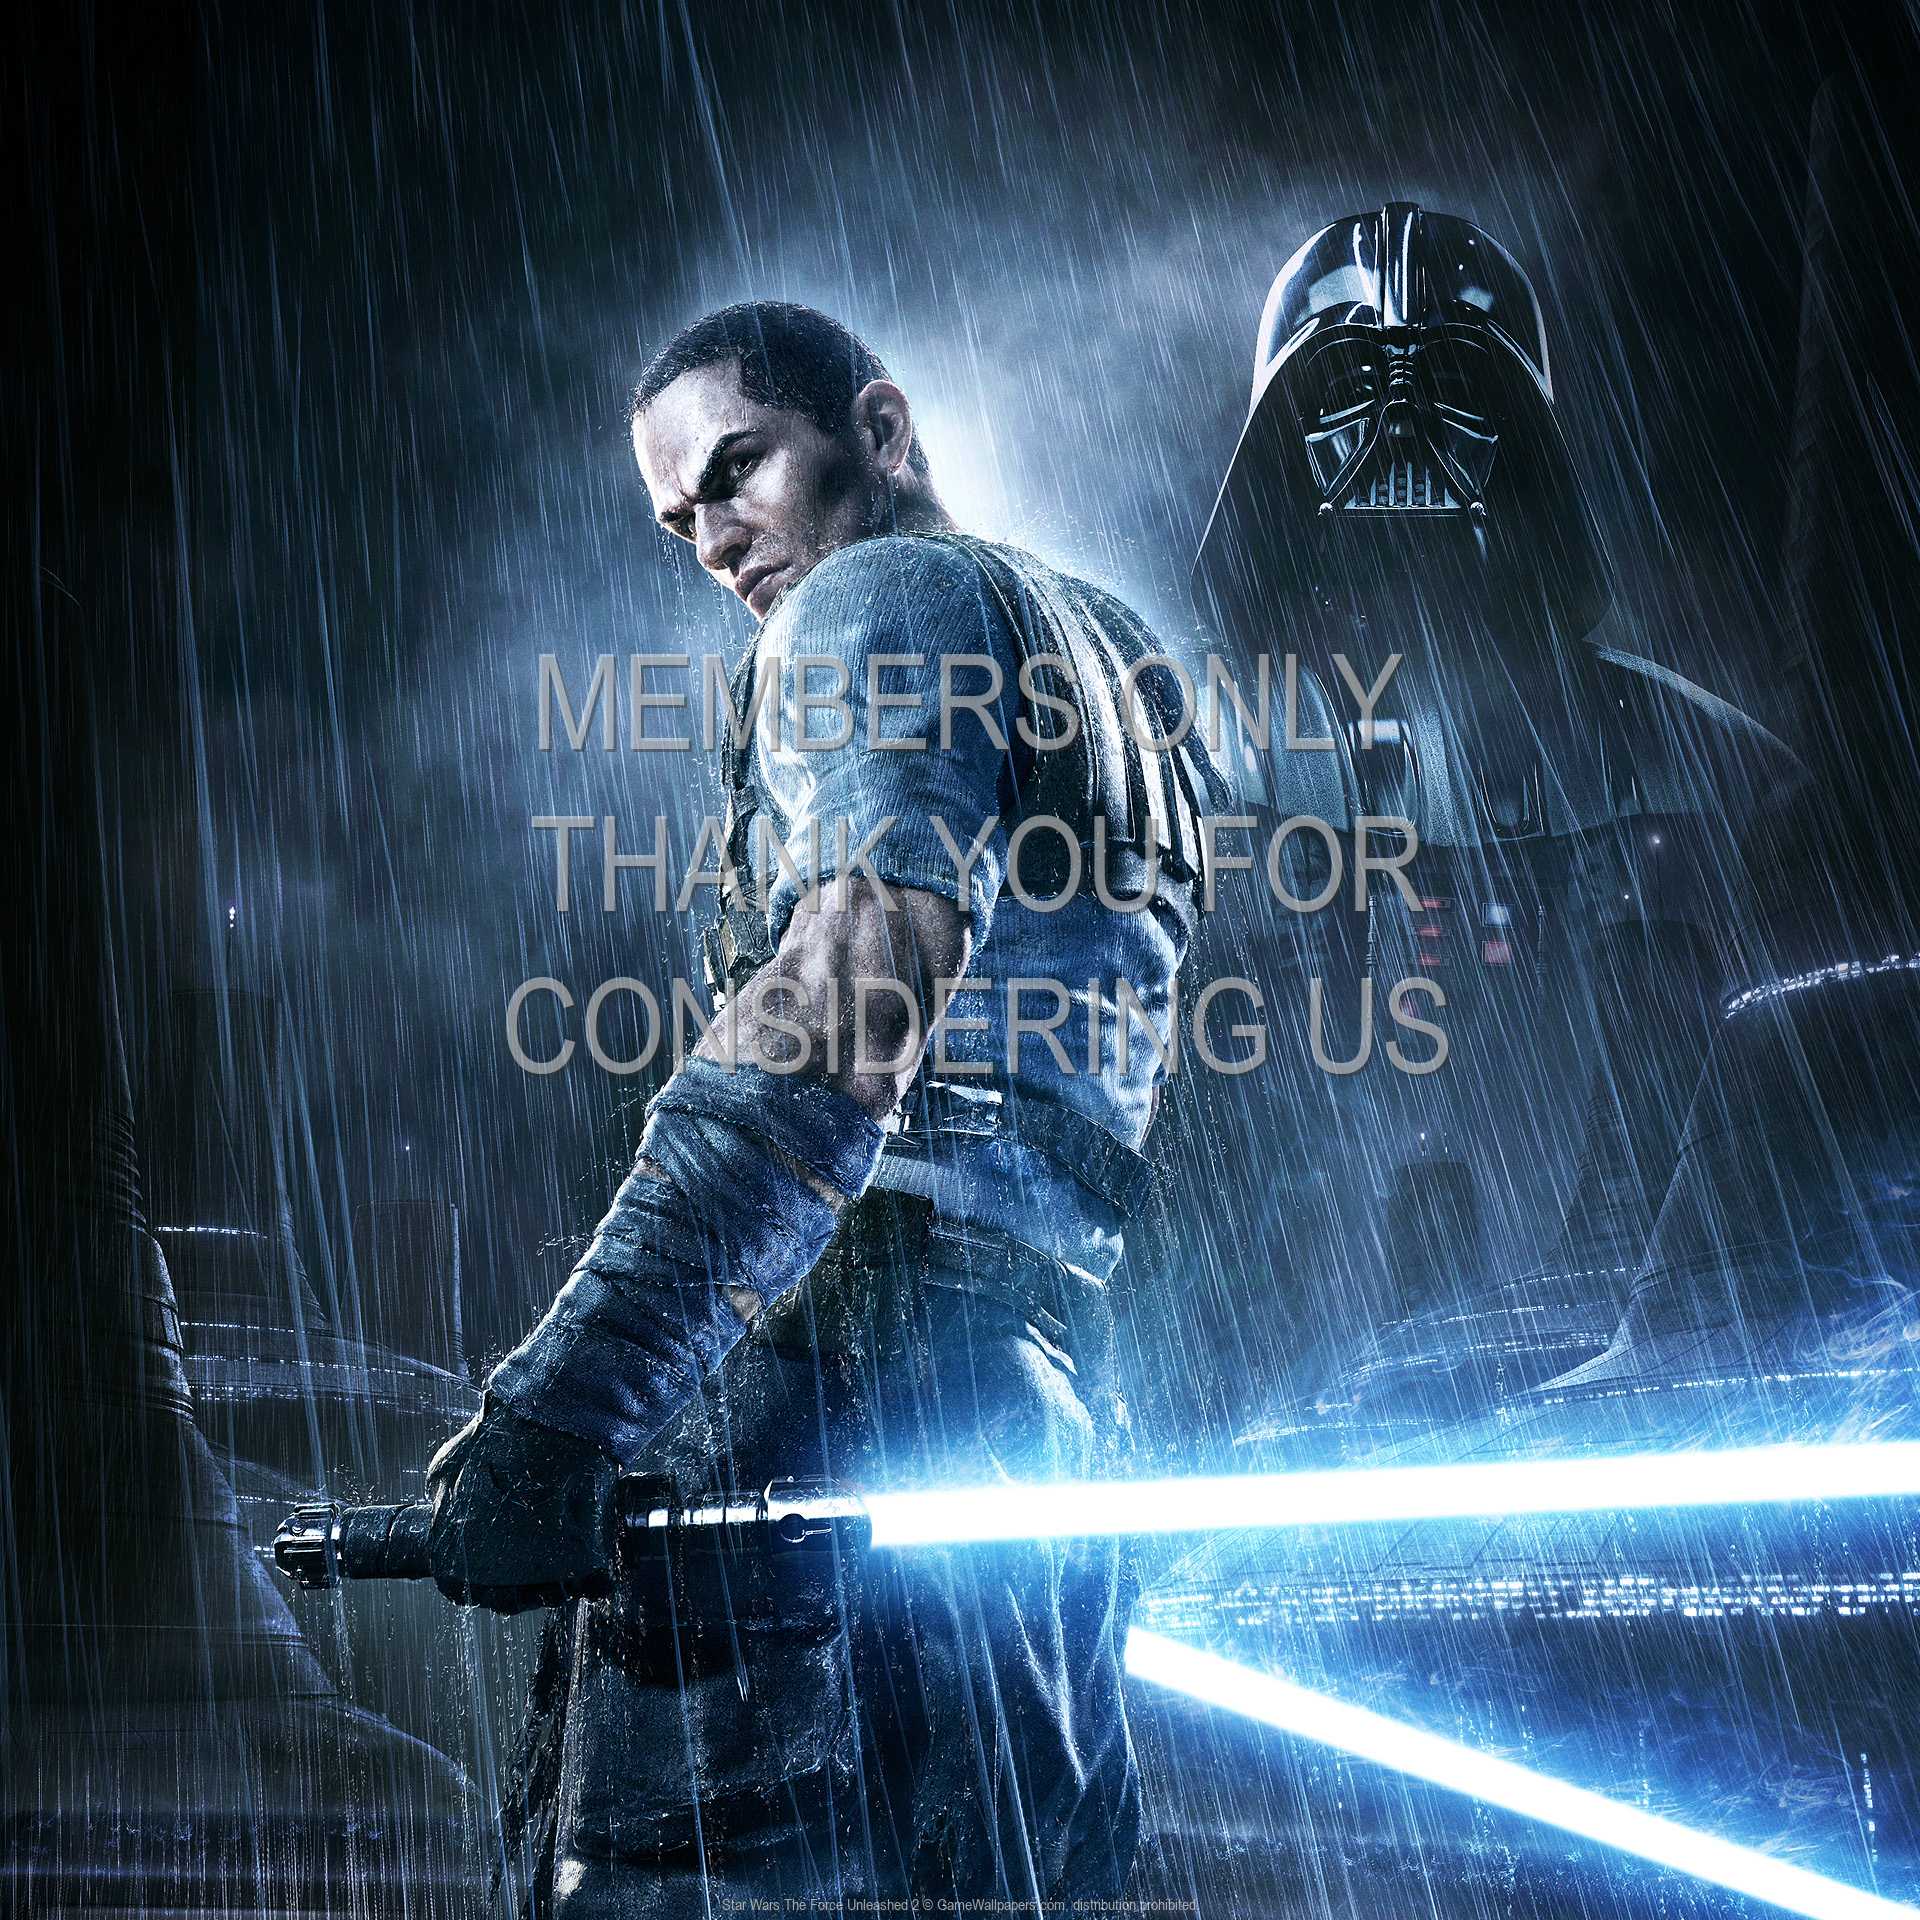 Star Wars: The Force Unleashed 2 1080p Horizontal Mobile fond d'cran 02